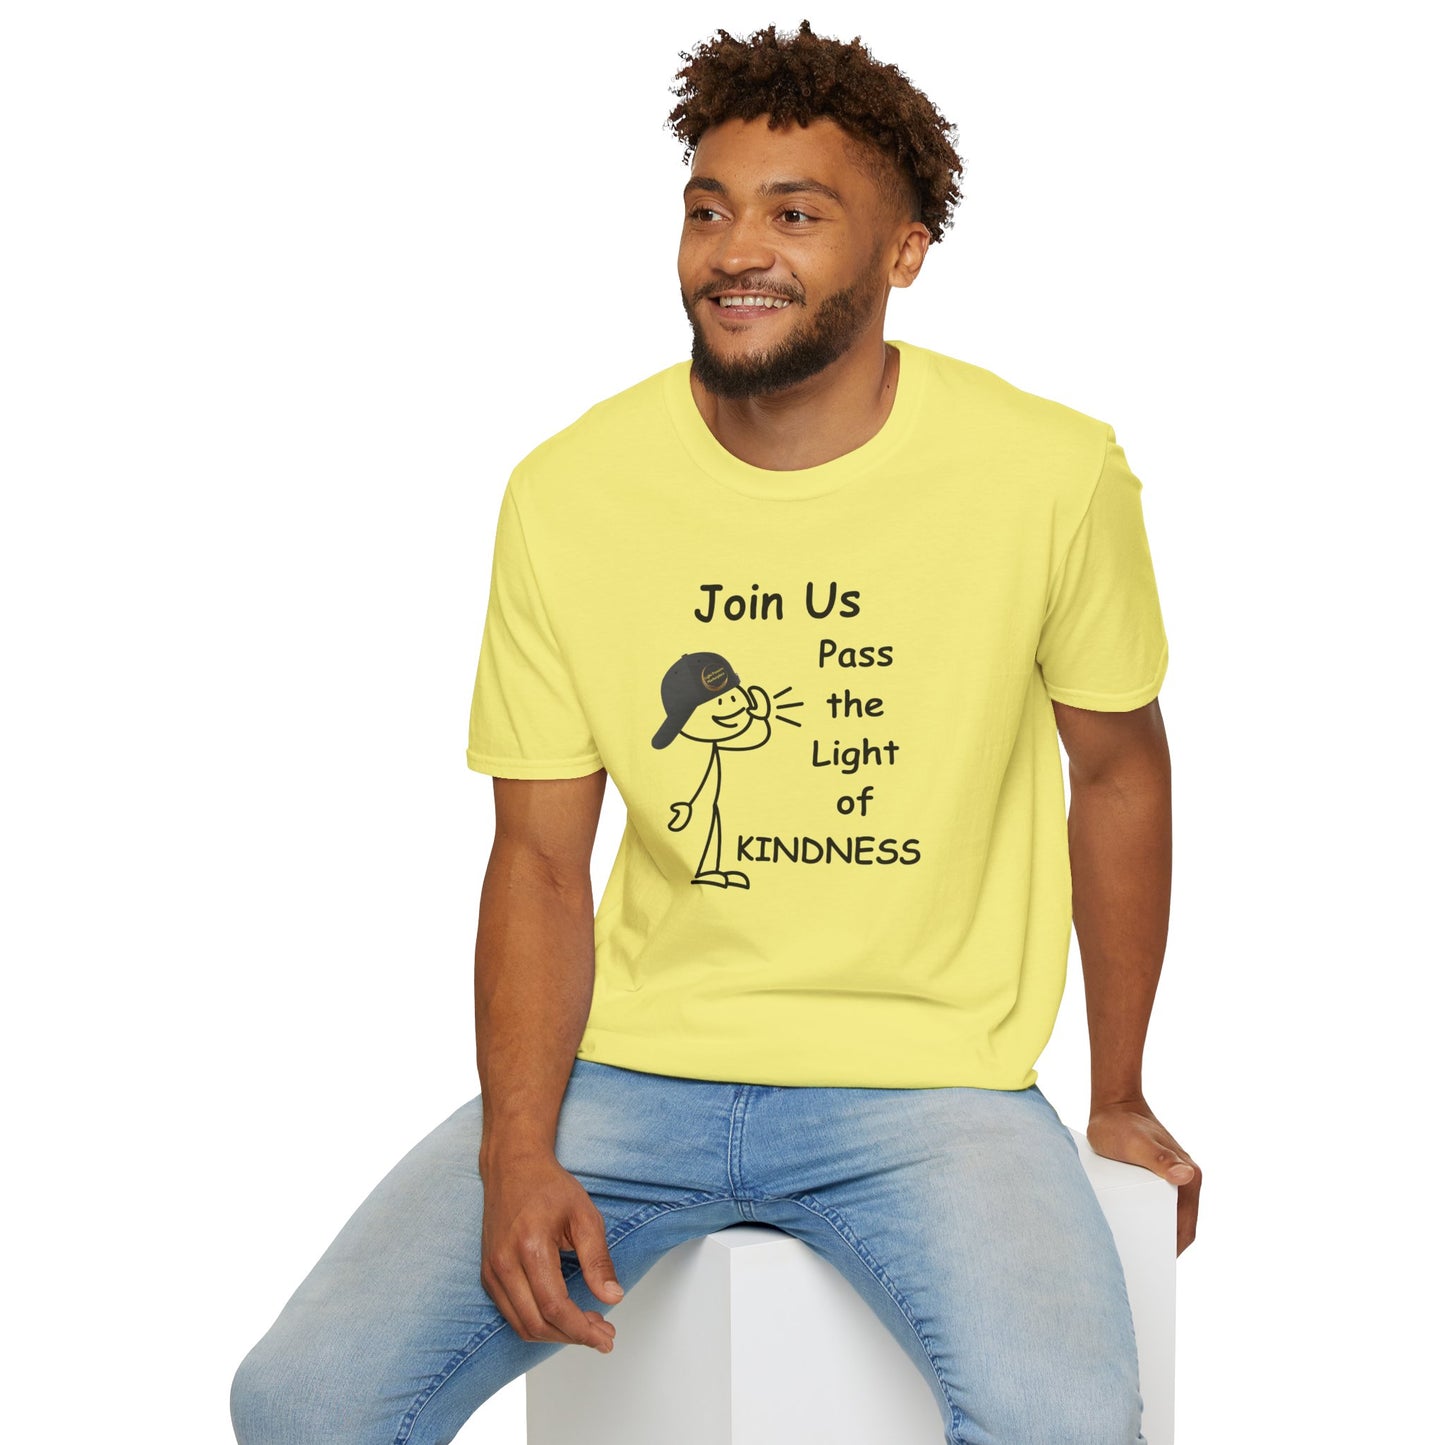 Join Us Pass the Light of Kindness Black Male Adult  mockup jpg